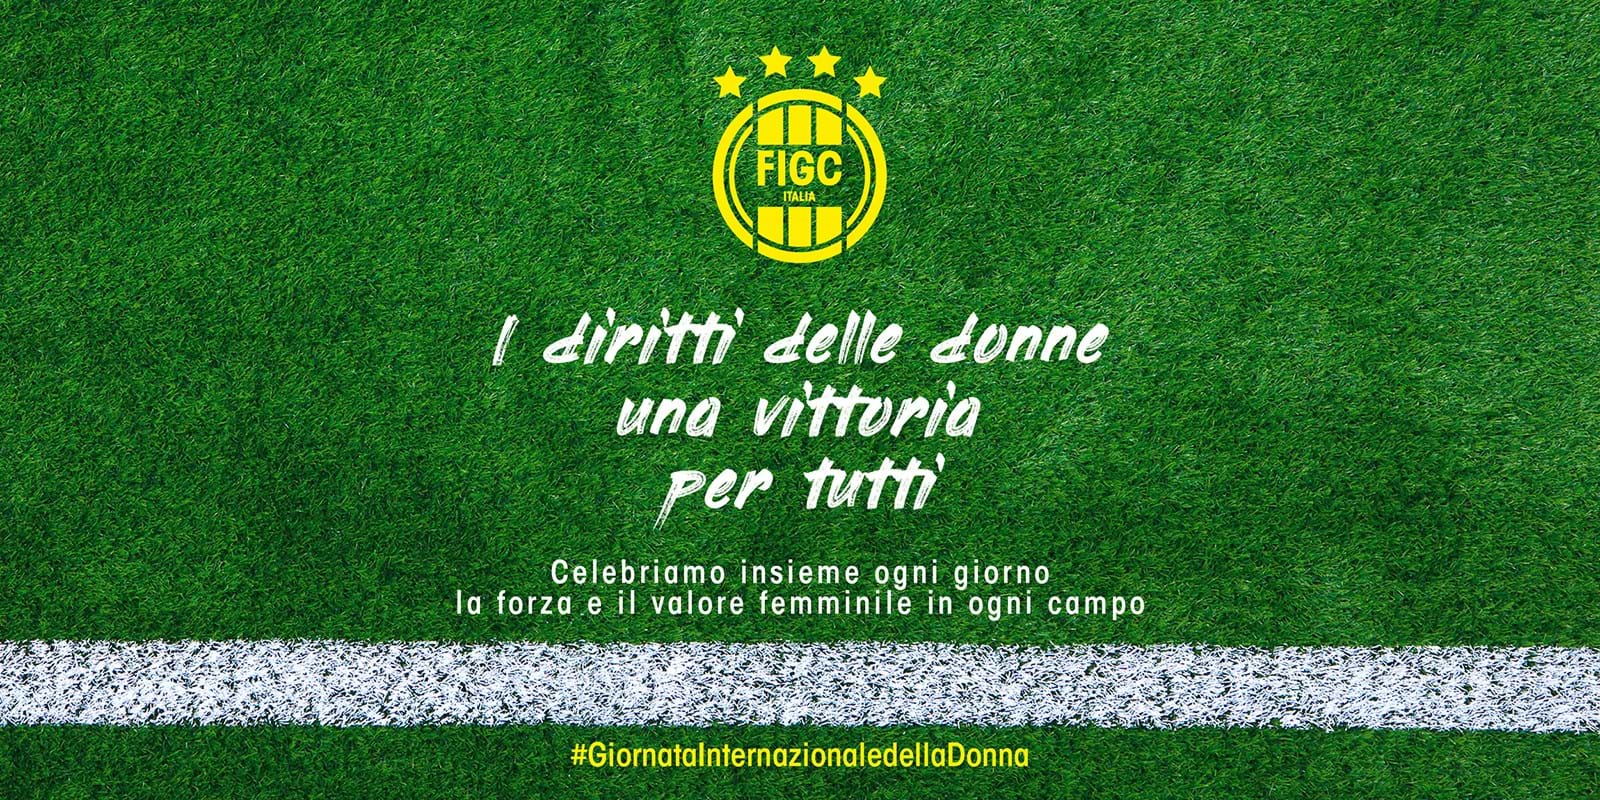 "Women's rights is a victory for all": the FIGC campaign on International Women's Day